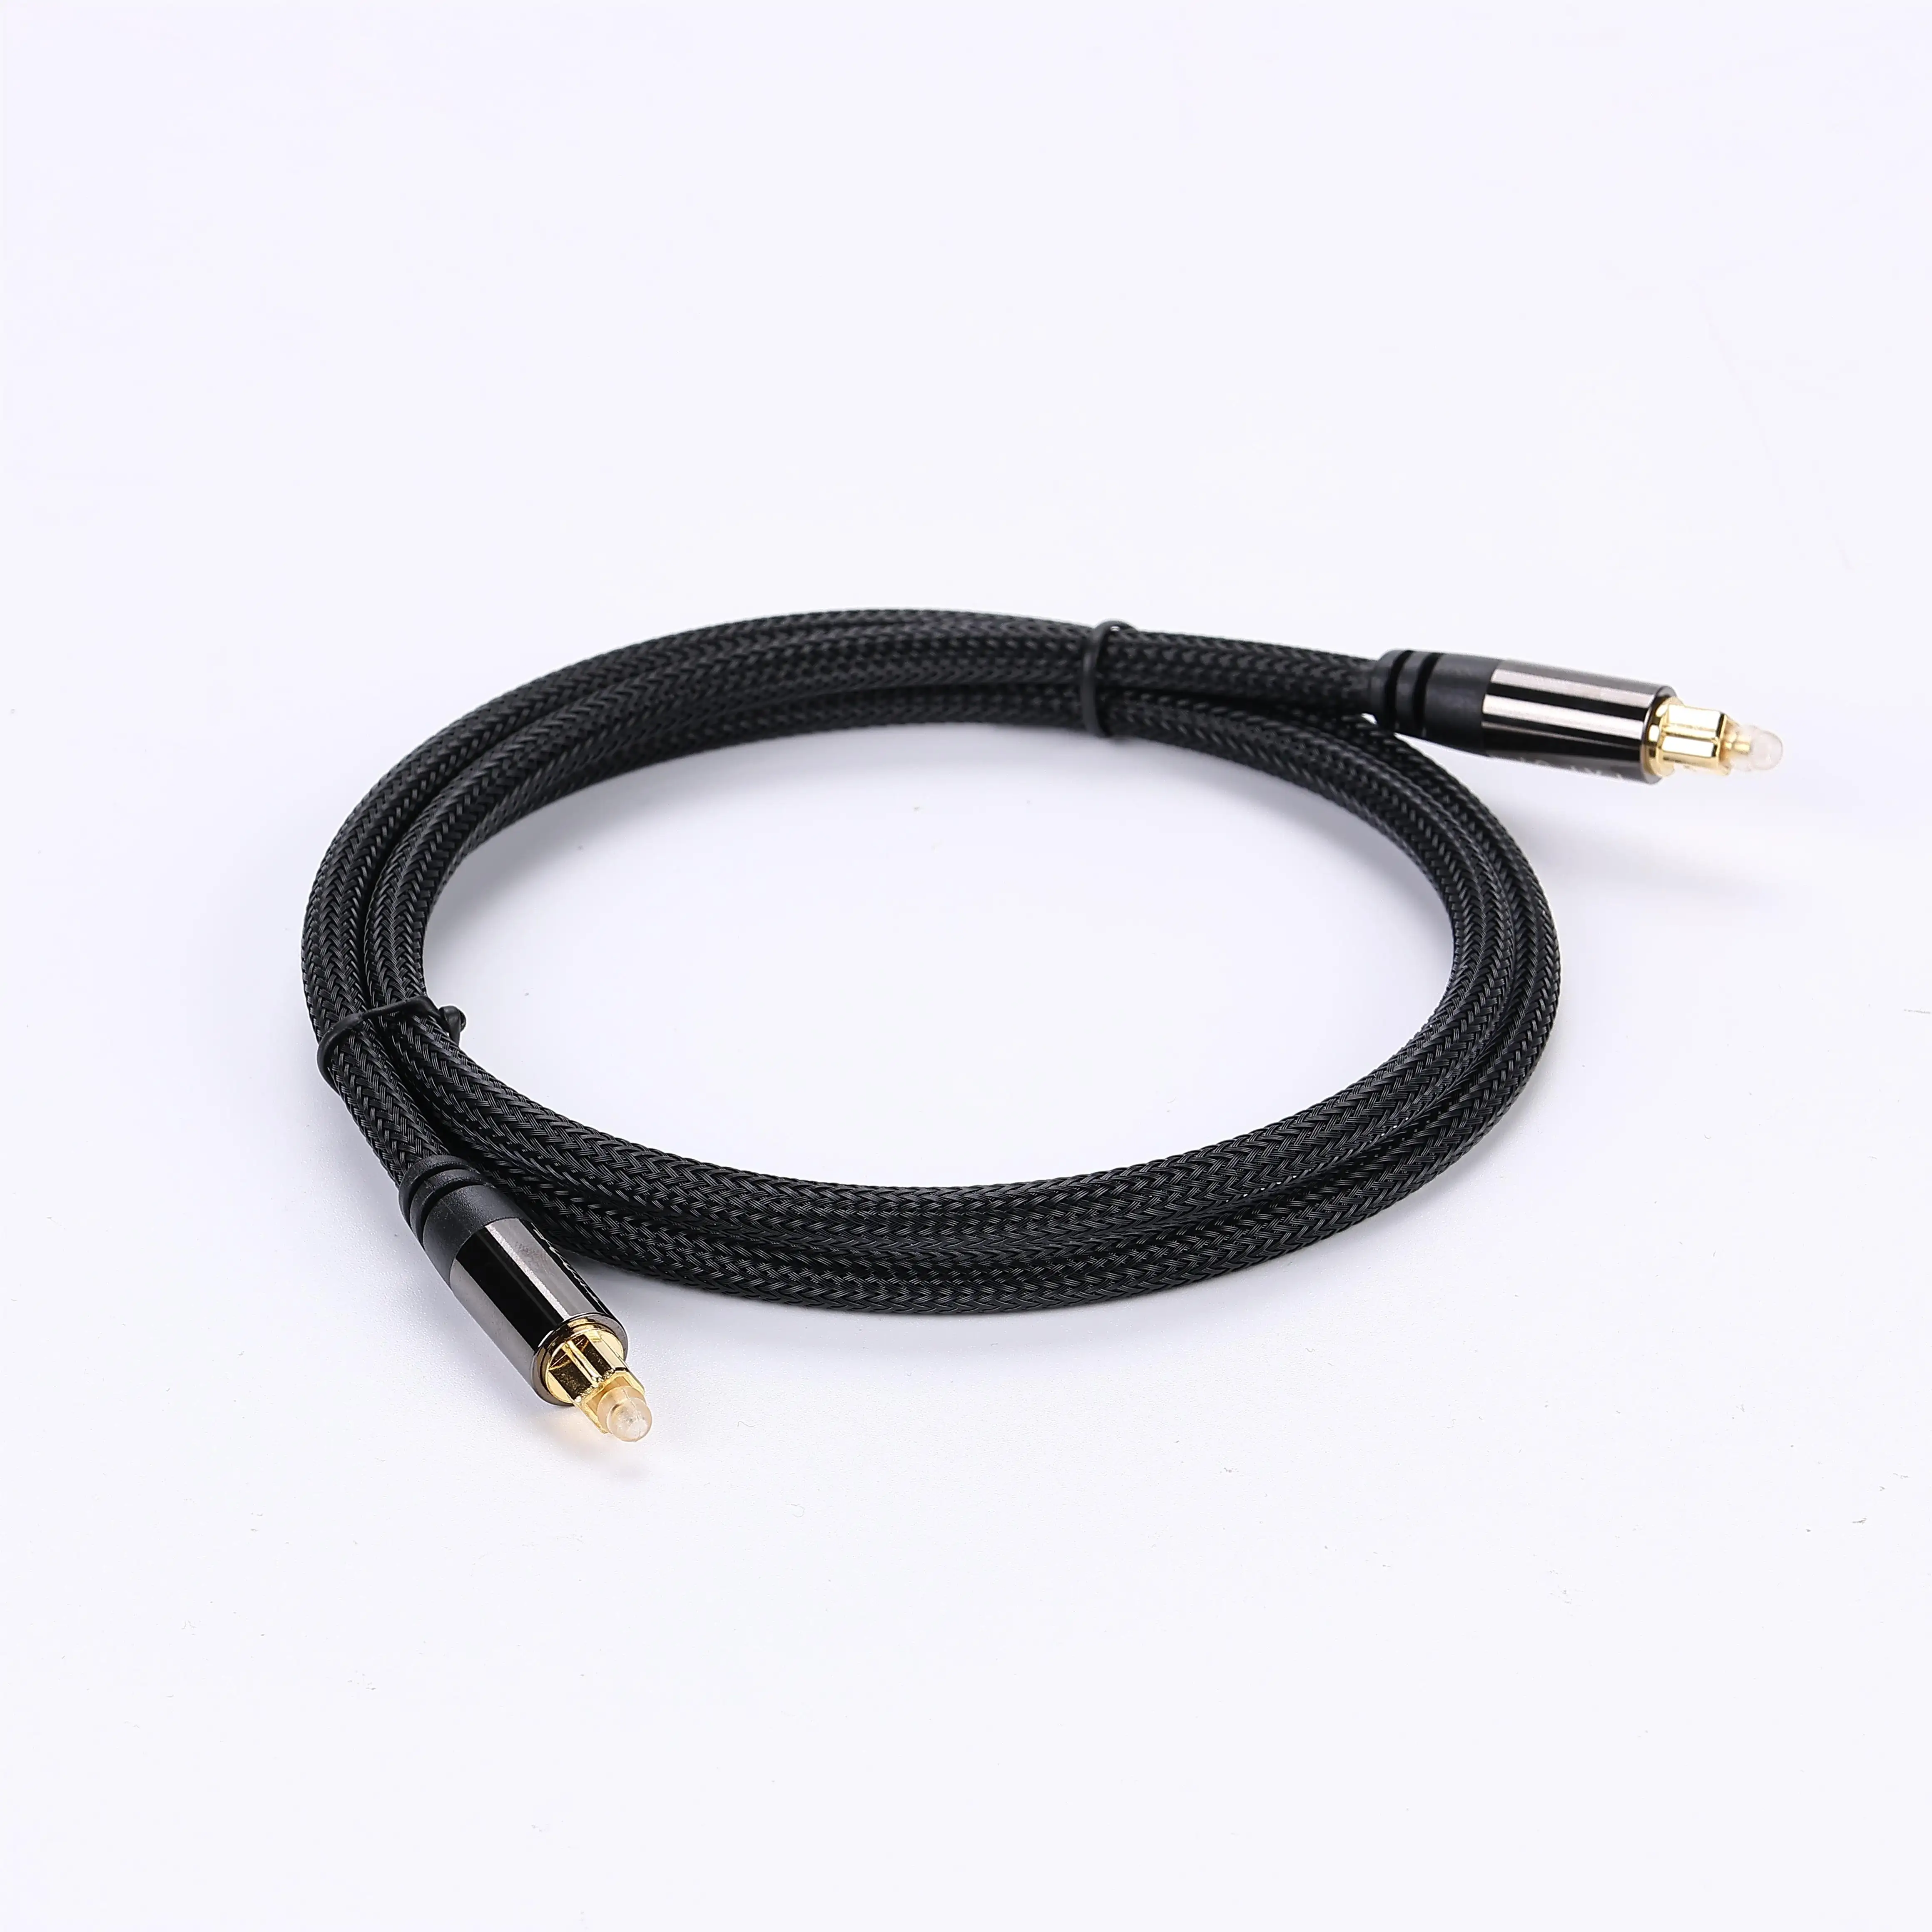 High Quality Gold Plated Plug Fiber Optic Digital Audio Toslink Standard Male to Male Cable M/M